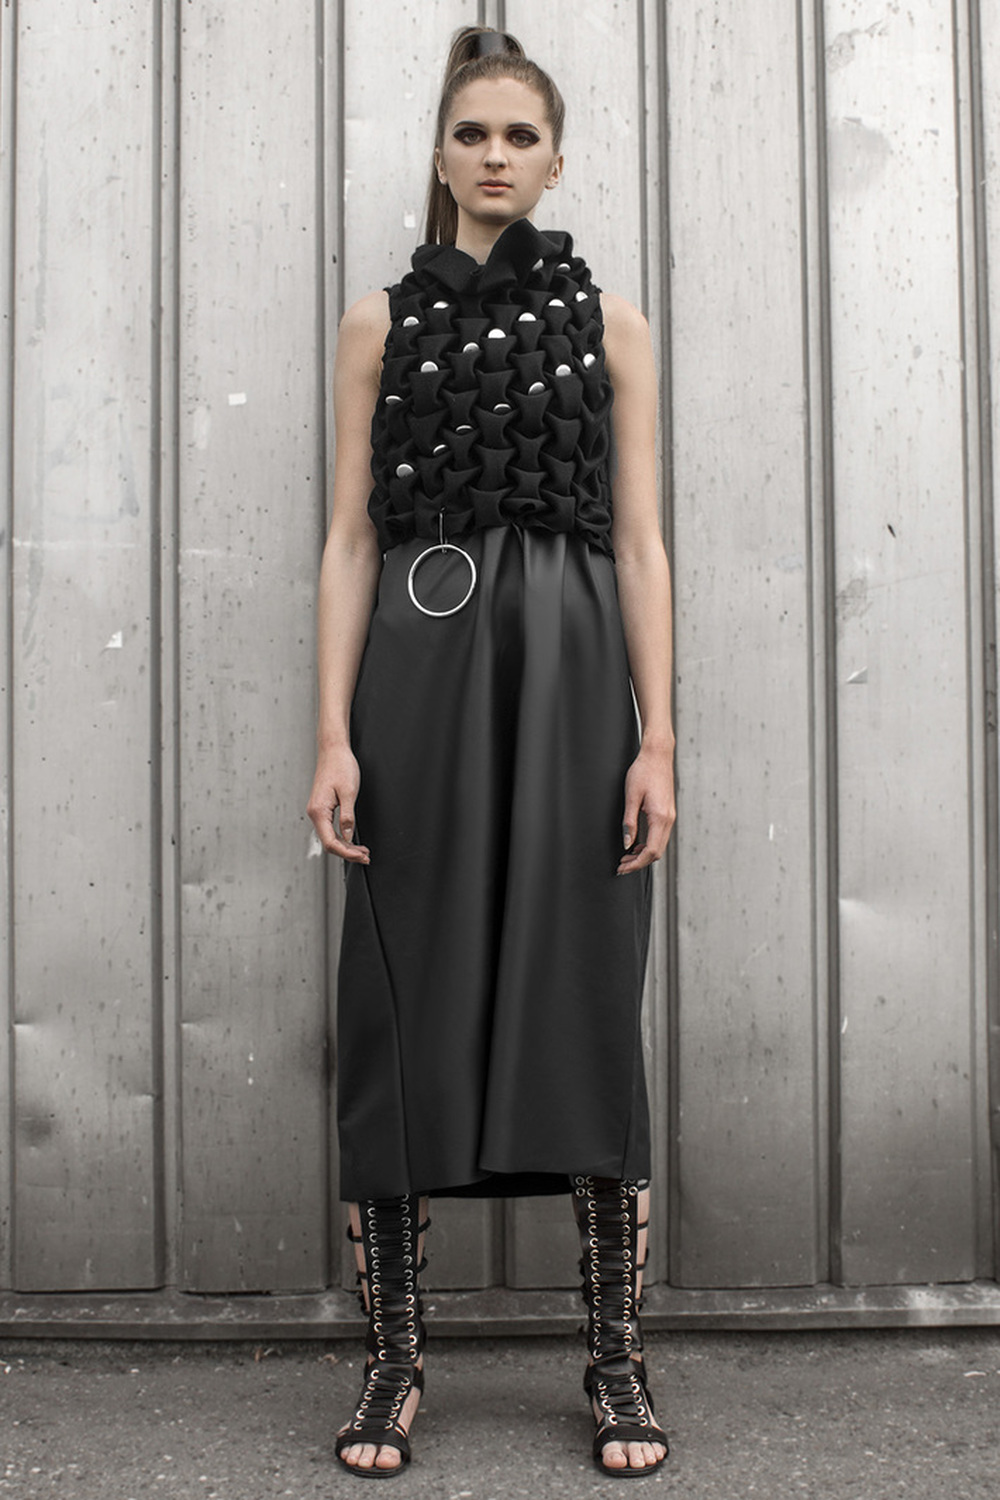 Look 10

Hand-smocked, fine cashmere top with raw metal embellishments and a leather skirt 